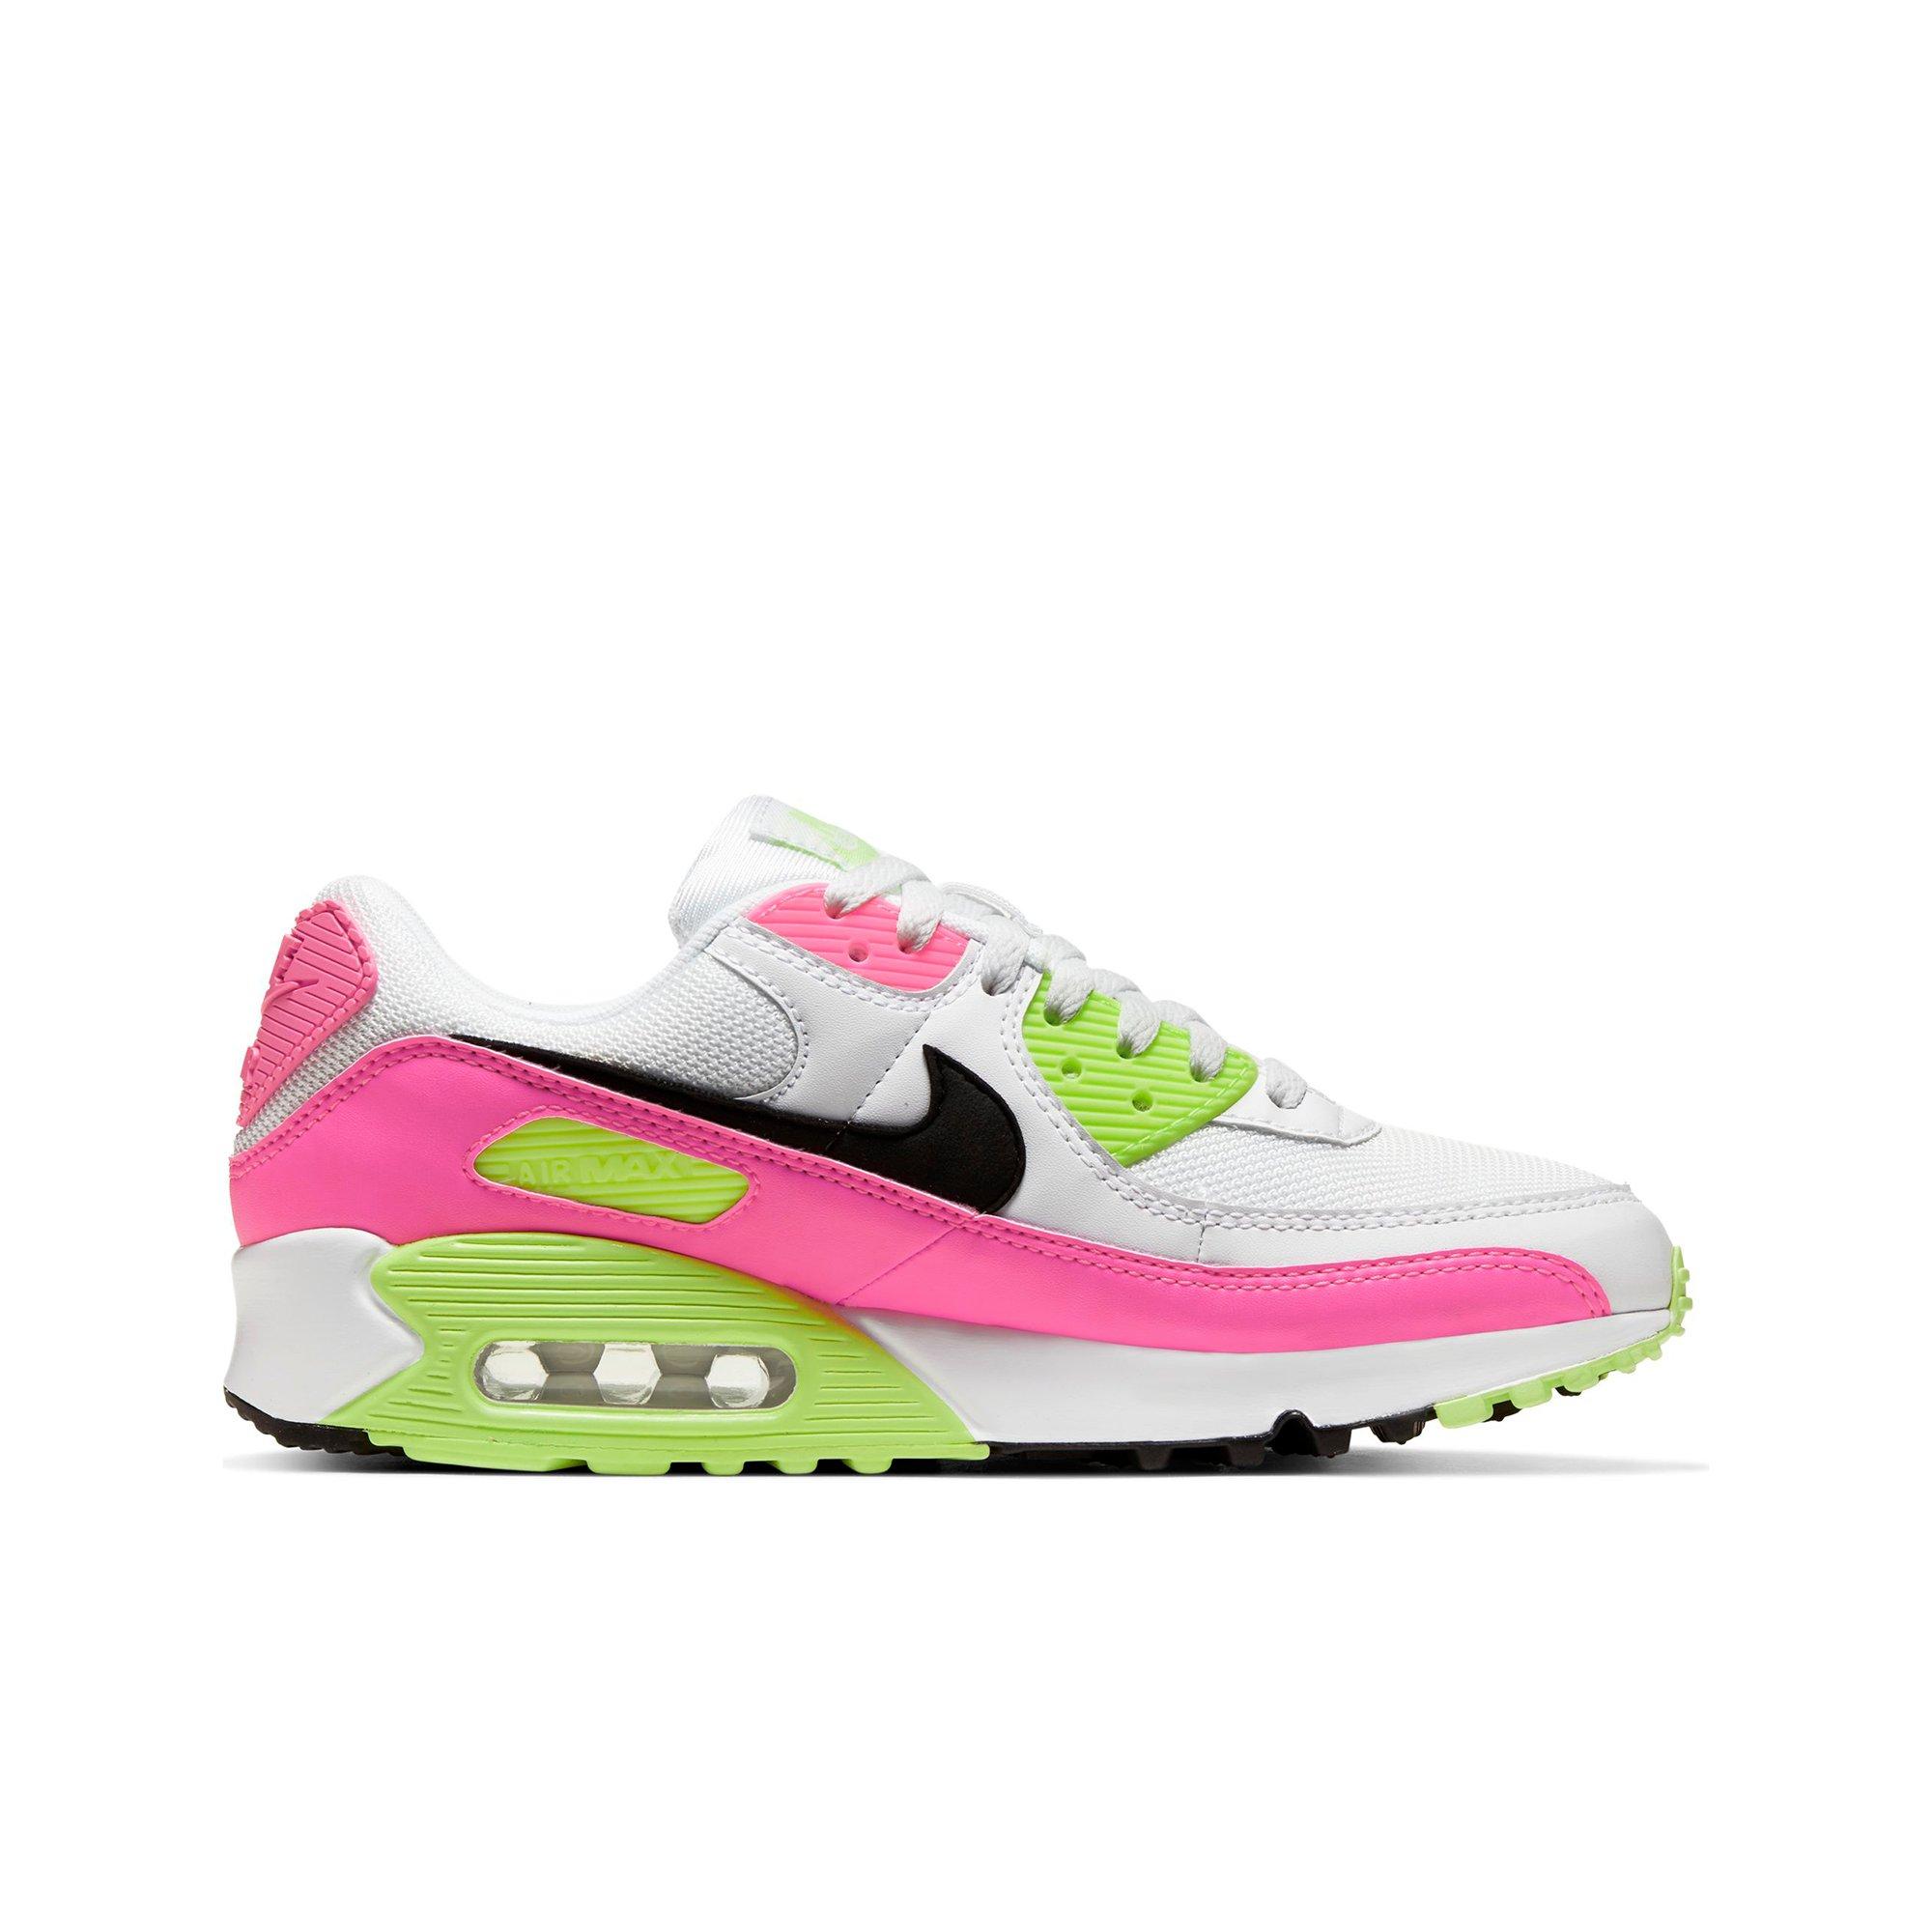 nike shoes pink and green